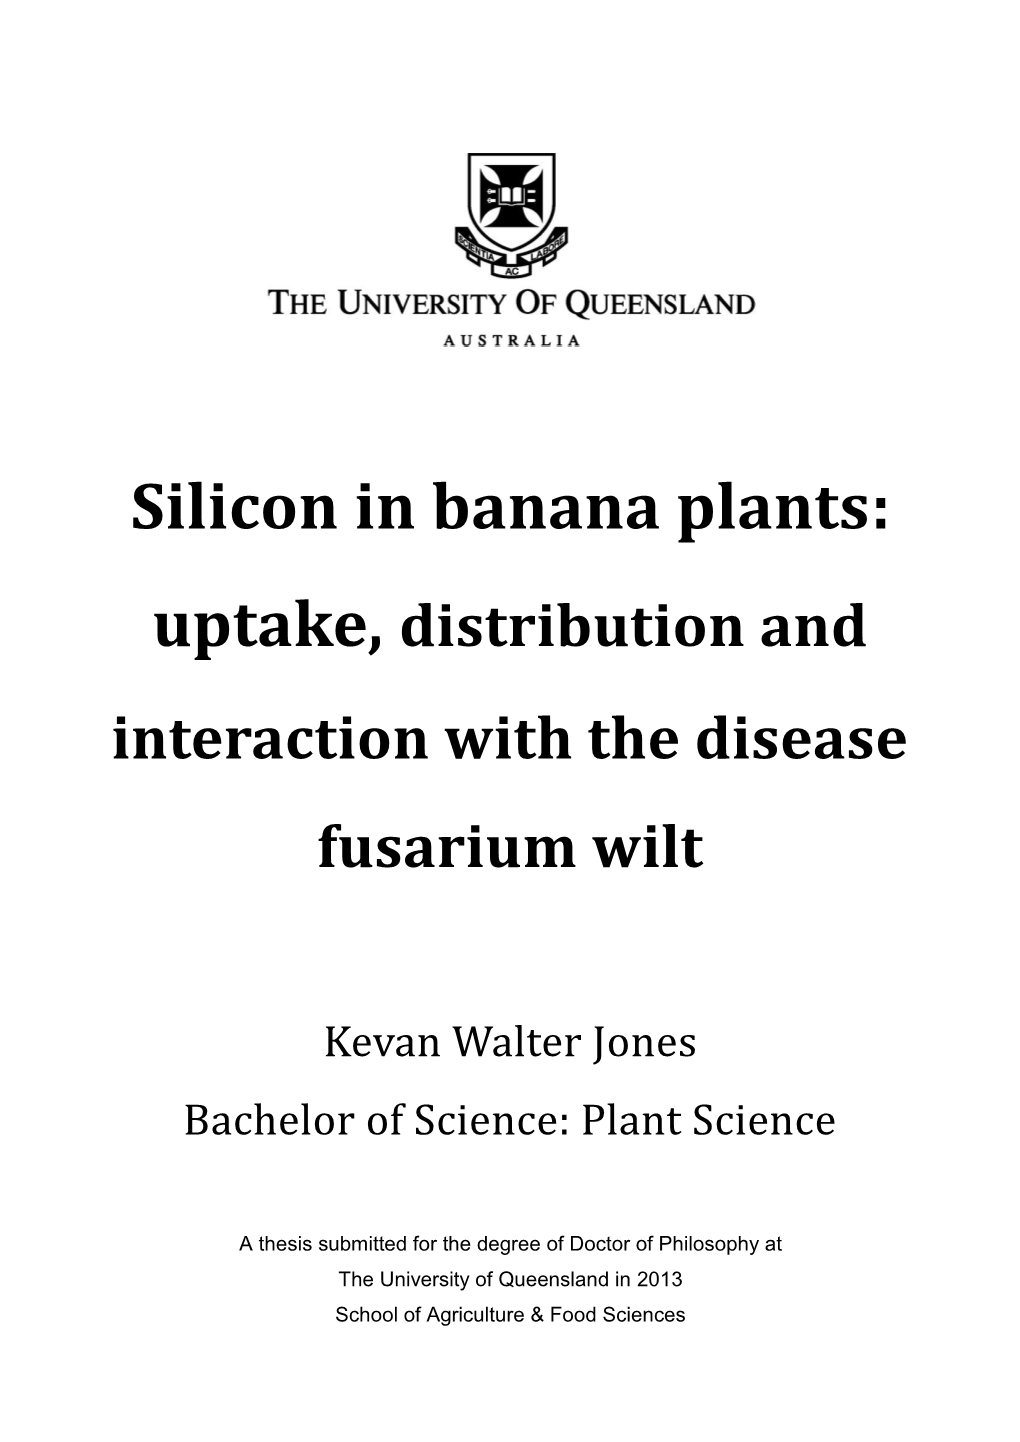 Silicon in Banana Plants: Uptake, Distribution and Interaction with the Disease